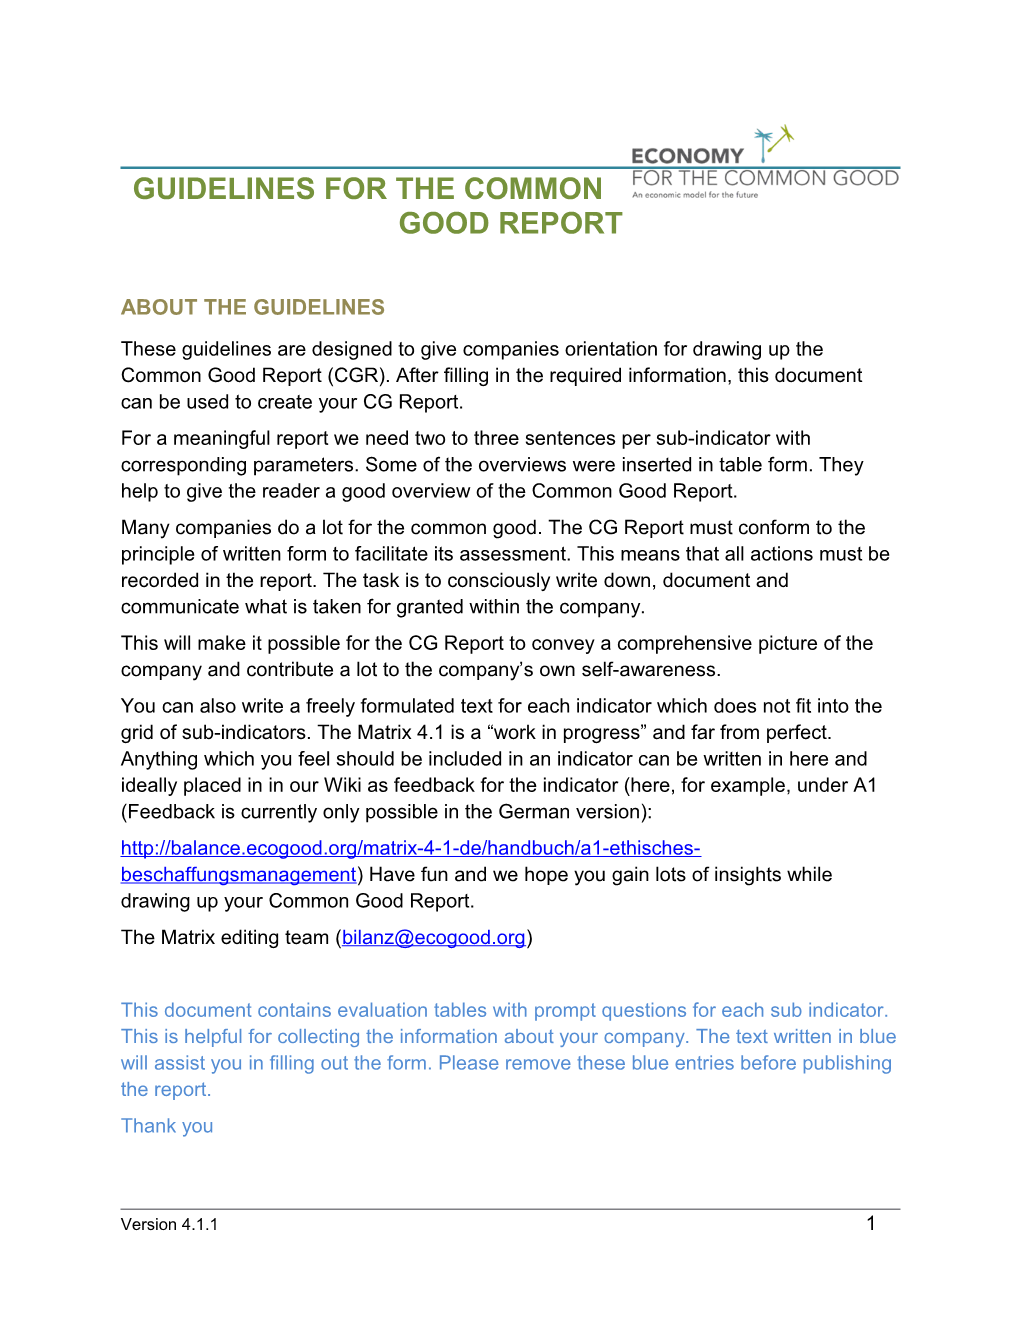 Guidelines for the Common Good Report